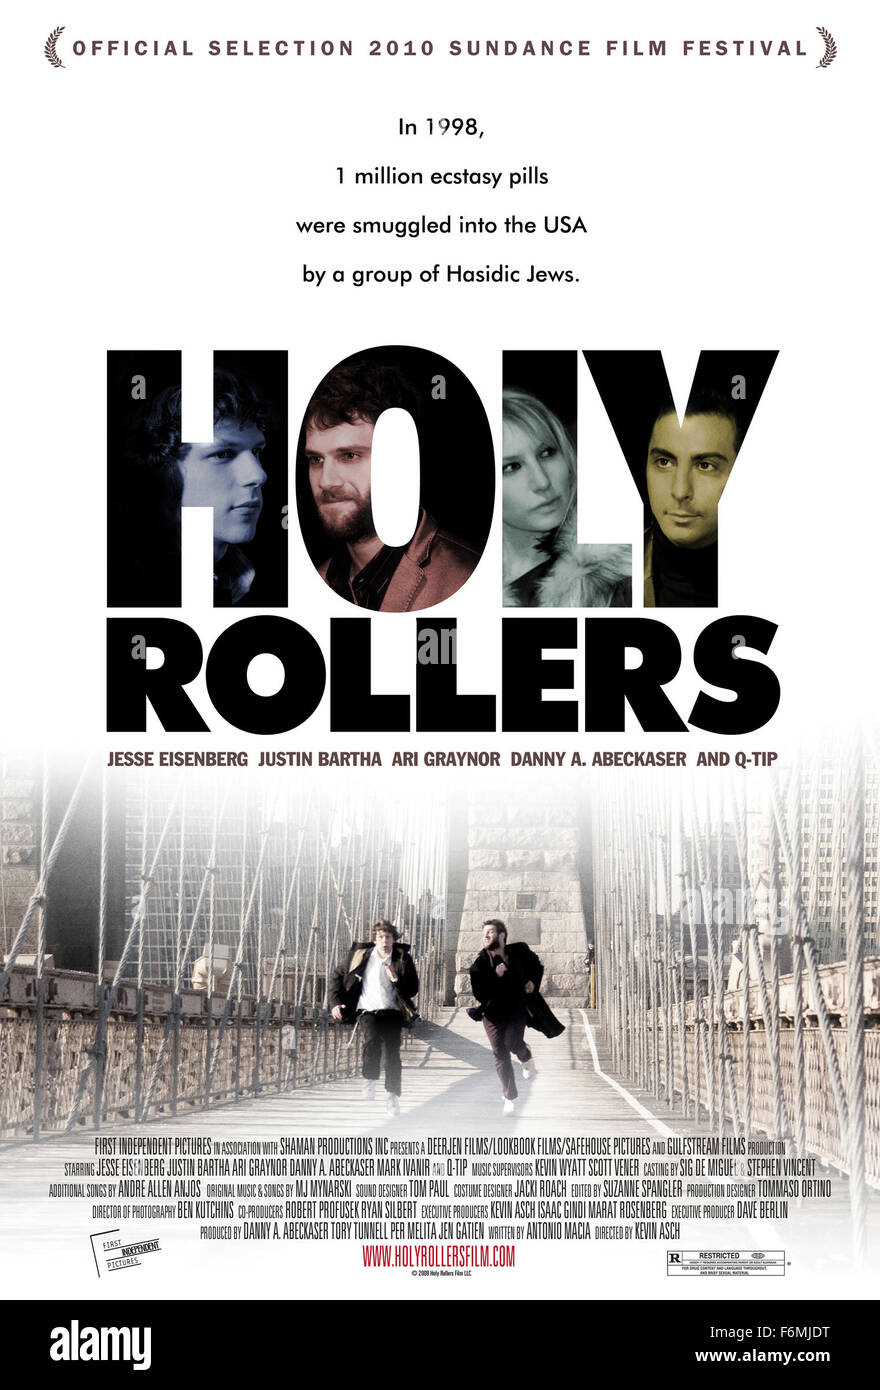 RELEASE DATE: January 25, 2010   MOVIE TITLE: Holy Rollers   STUDIO: Deerjen Films   DIRECTOR: Kevin Asch  PLOT: In Brooklyn, a youth from an Orthodox Jewish community is lured into becoming an Ecstasy dealer by his pal who has ties to an Israel drug cartel   PICTURED: JESSE EISENBERG as Sam Gold, JUSTIN BARTHA as Yosef Zimmerman, DANNY A. ABECKASER as Jackie Solomon and ARI GRAYNOR as Rachel Apfel   (Credit Image: c Deerjen Films/Entertainment Pictures) Stock Photo